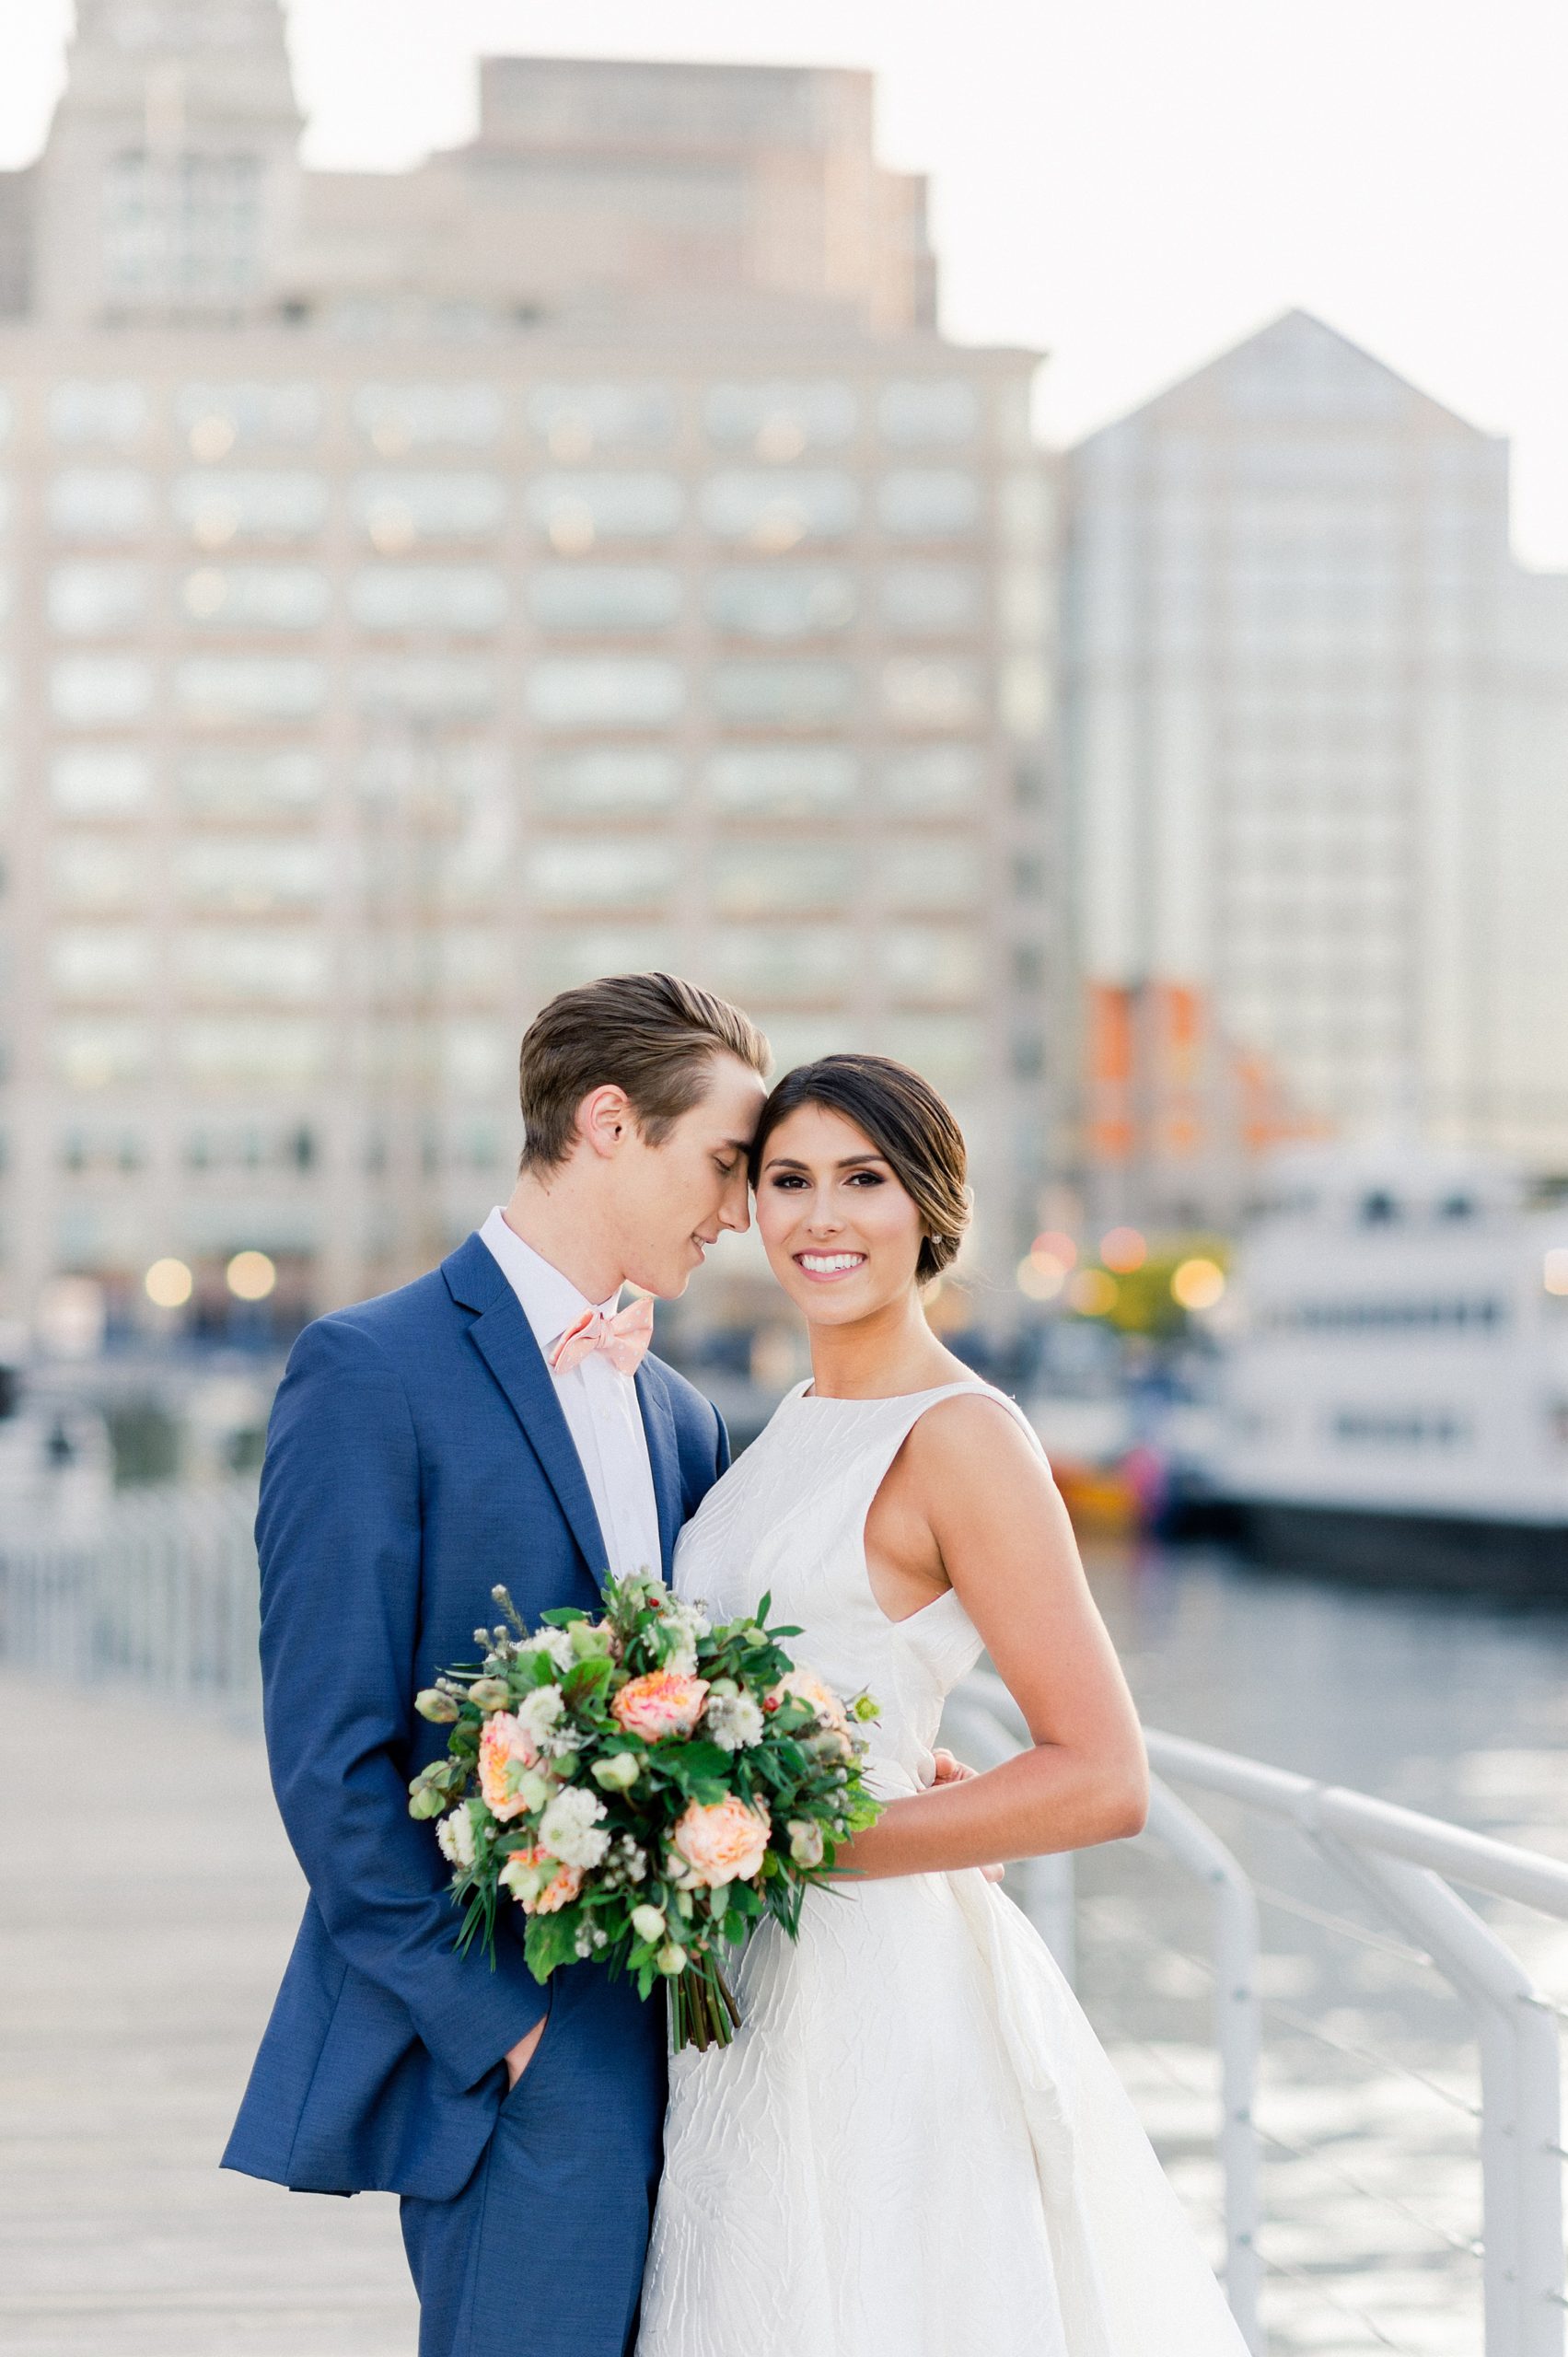 New England Aquarirum wedding inspiration bride and groom preppy chich couple with modern flair in Boston on the water